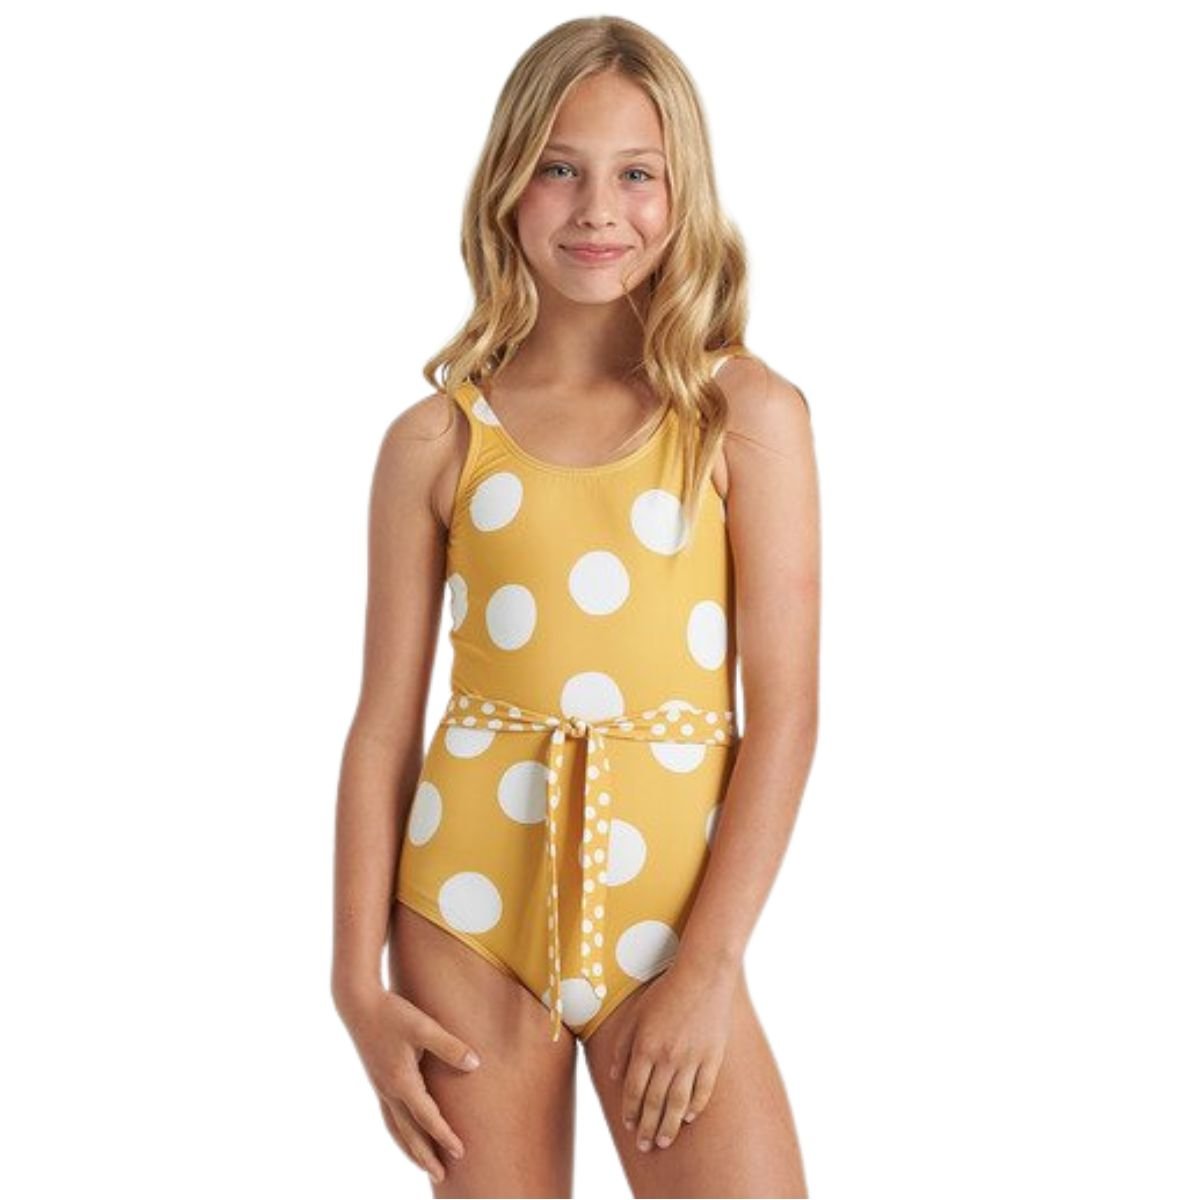 Billabong Girls 4Ever Sun One Piece Swimsuit in Bright Gold - BoardCo